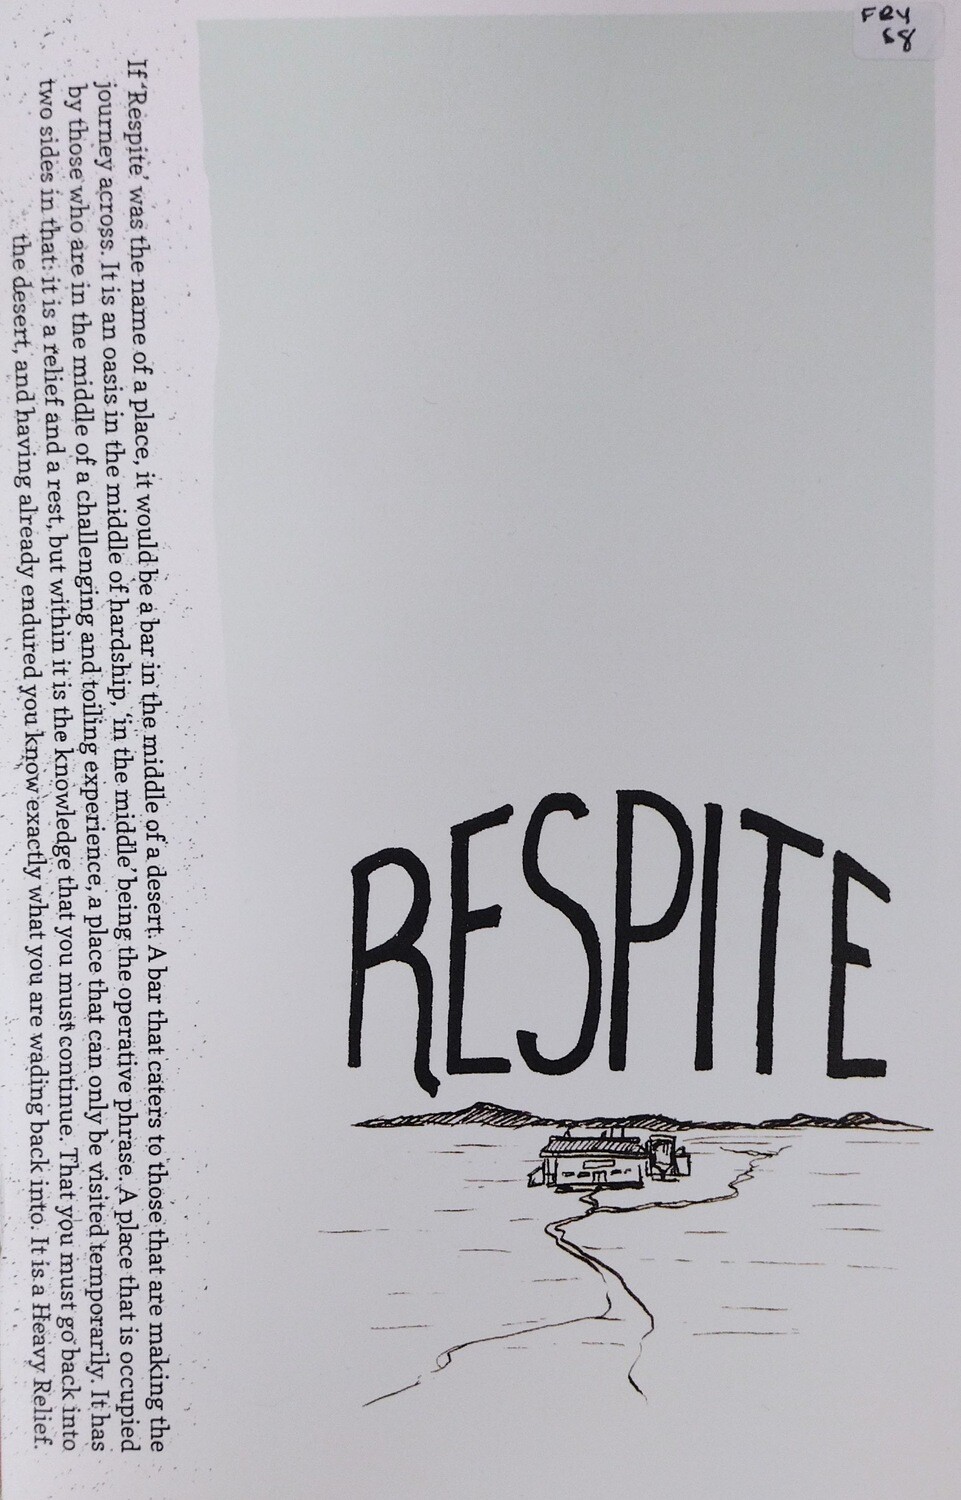 Respite - Anthology Zine Featuring Alex Fry & Others